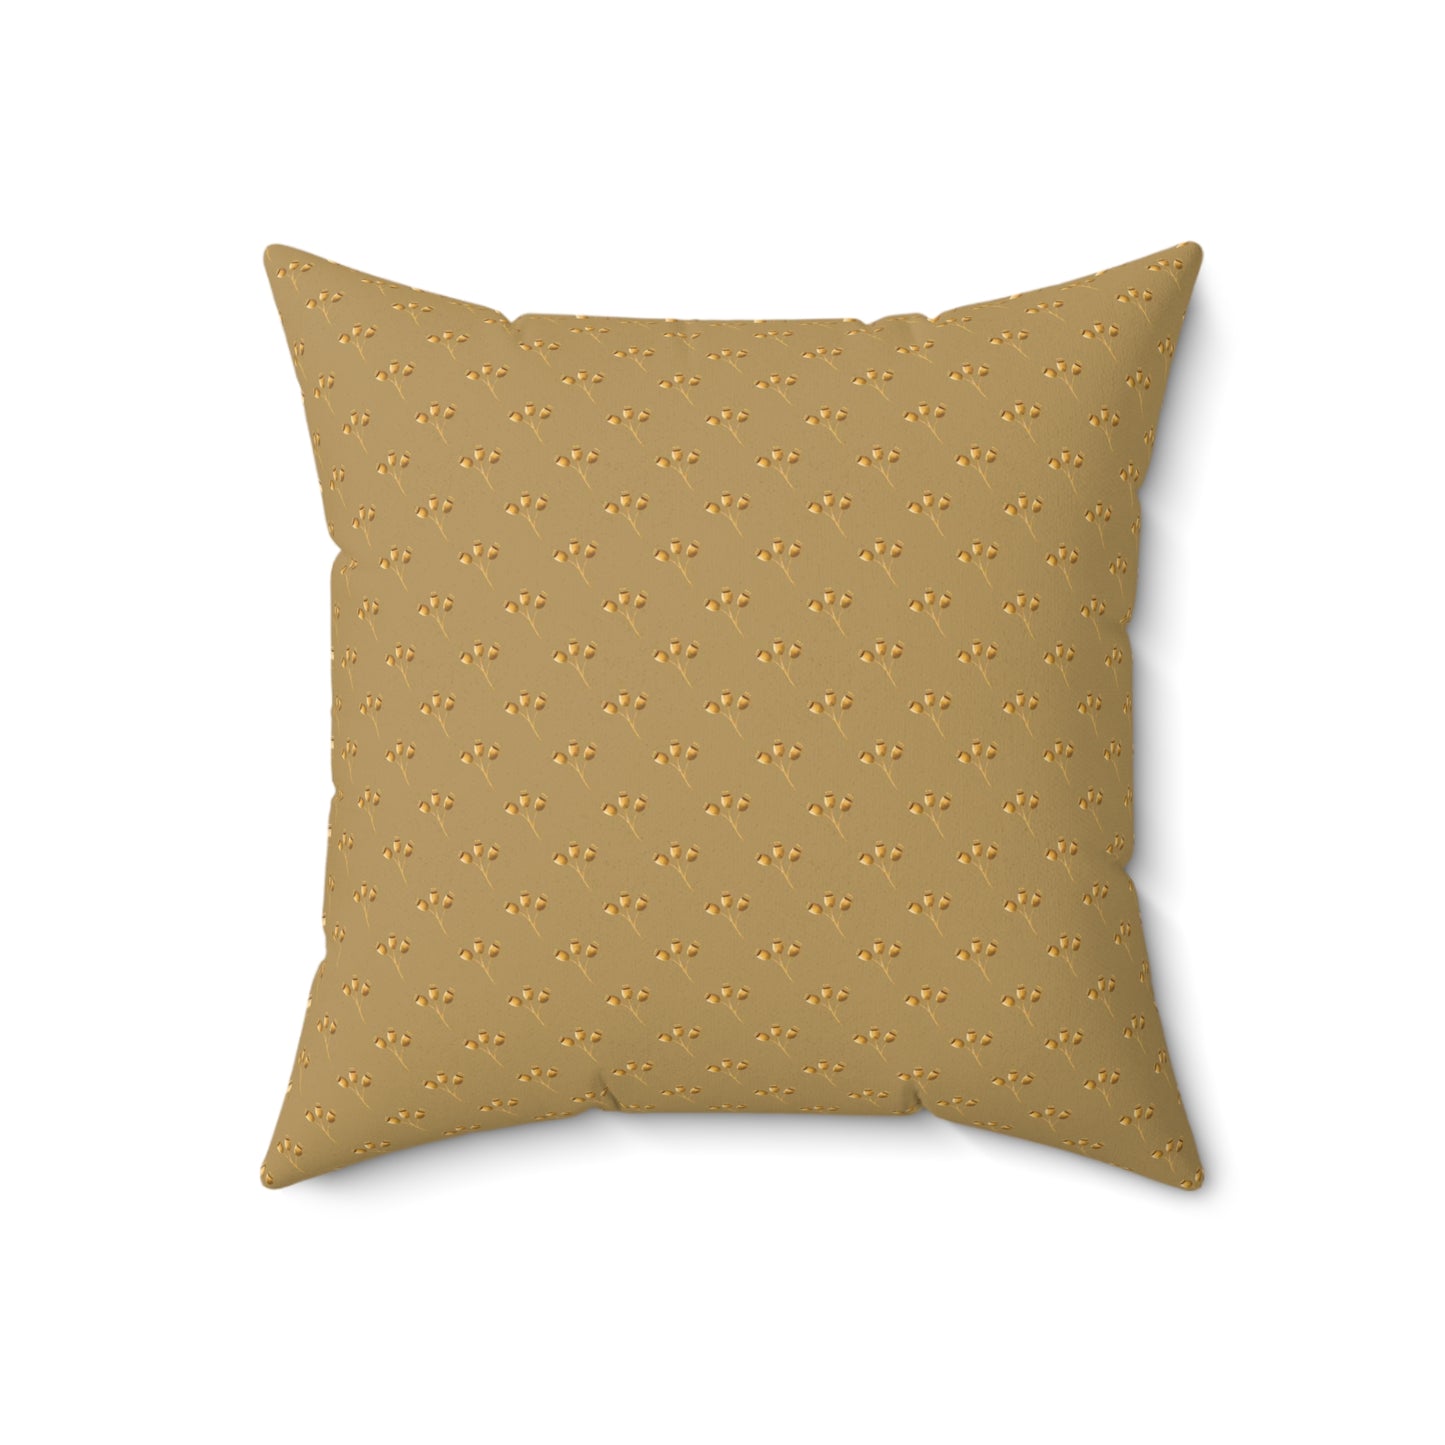 Golden Seed Pods Spun Polyester Square Pillow